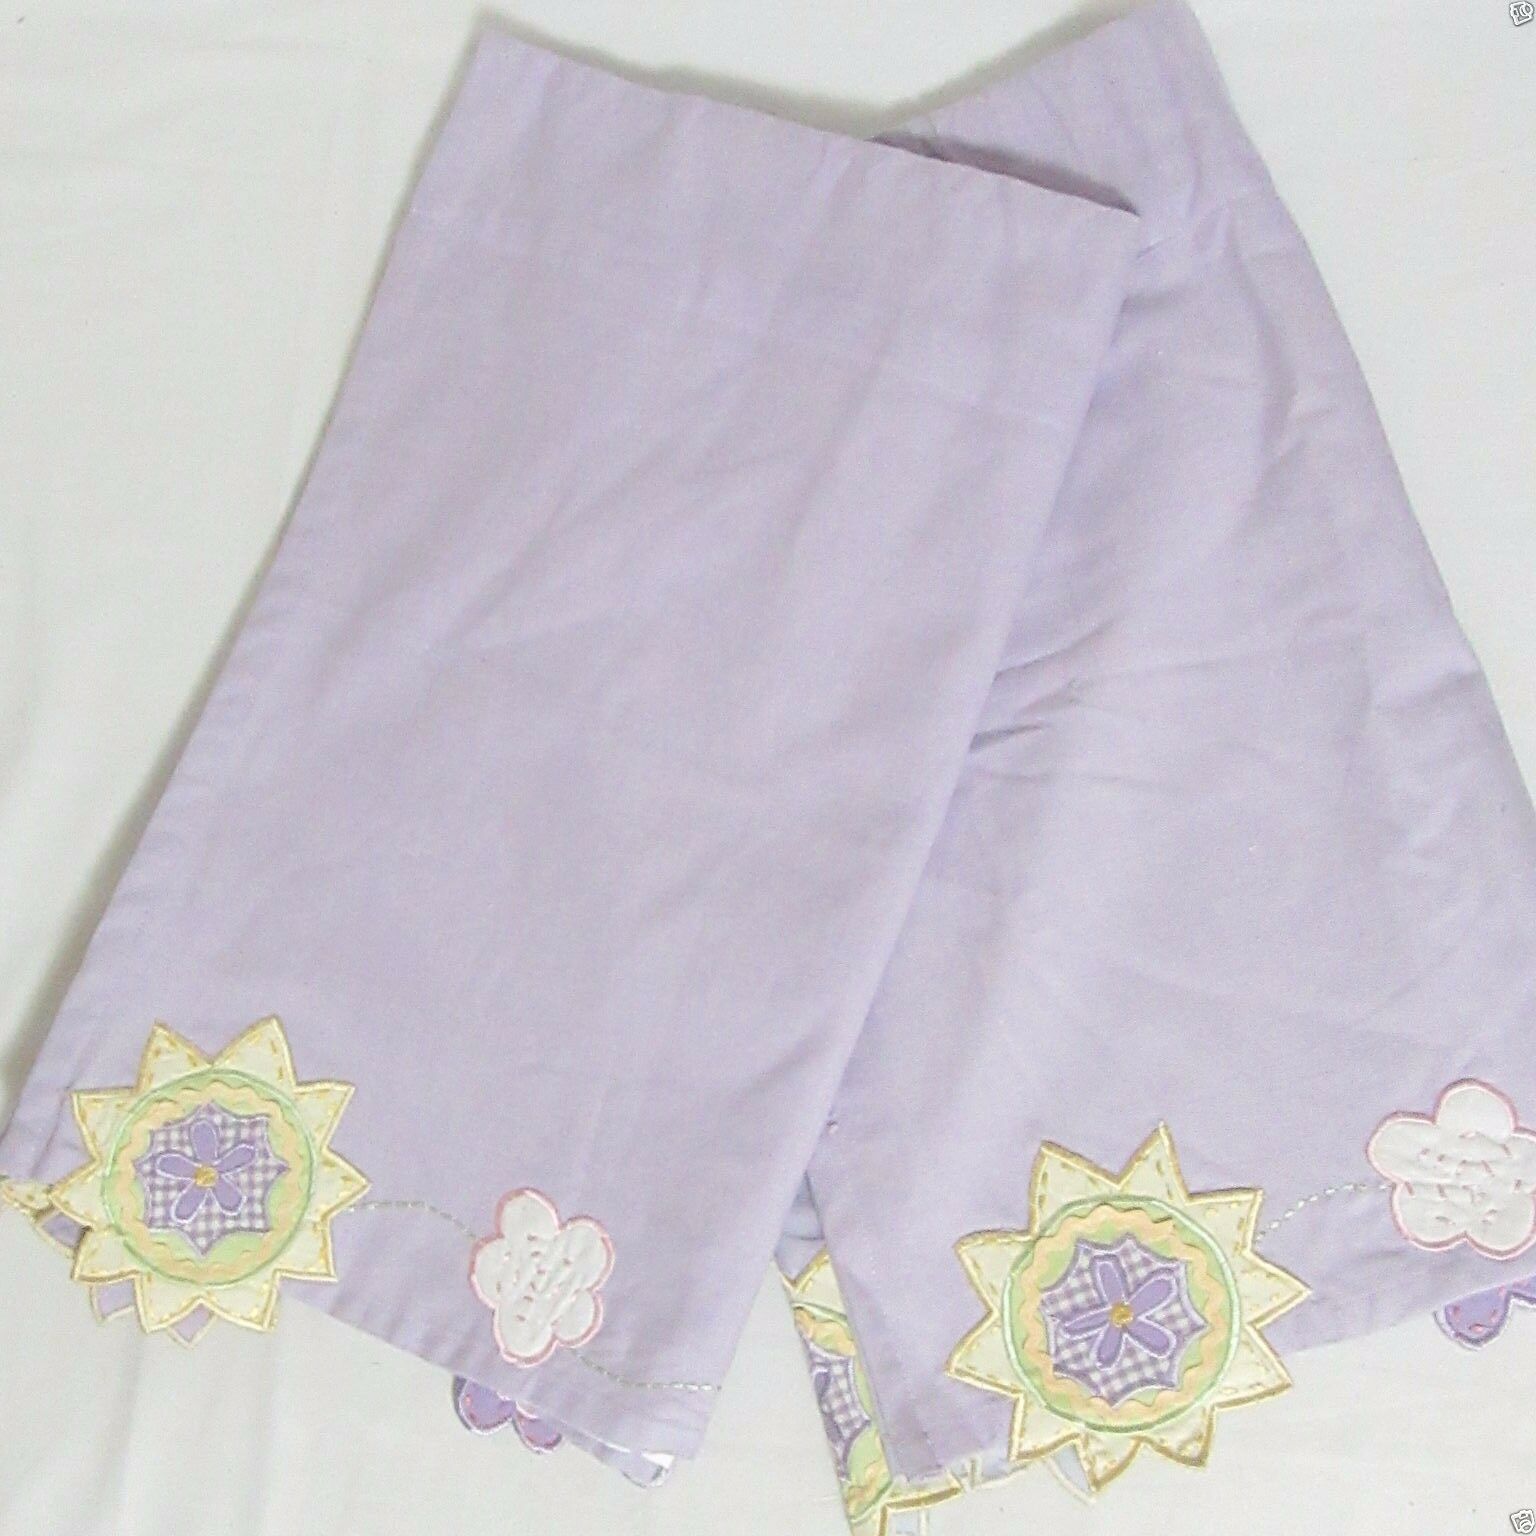 Pottery Barn Kids Embroidered Floral Sun and Clouds Lavender 2-PC Valance Set(s) - $32.00